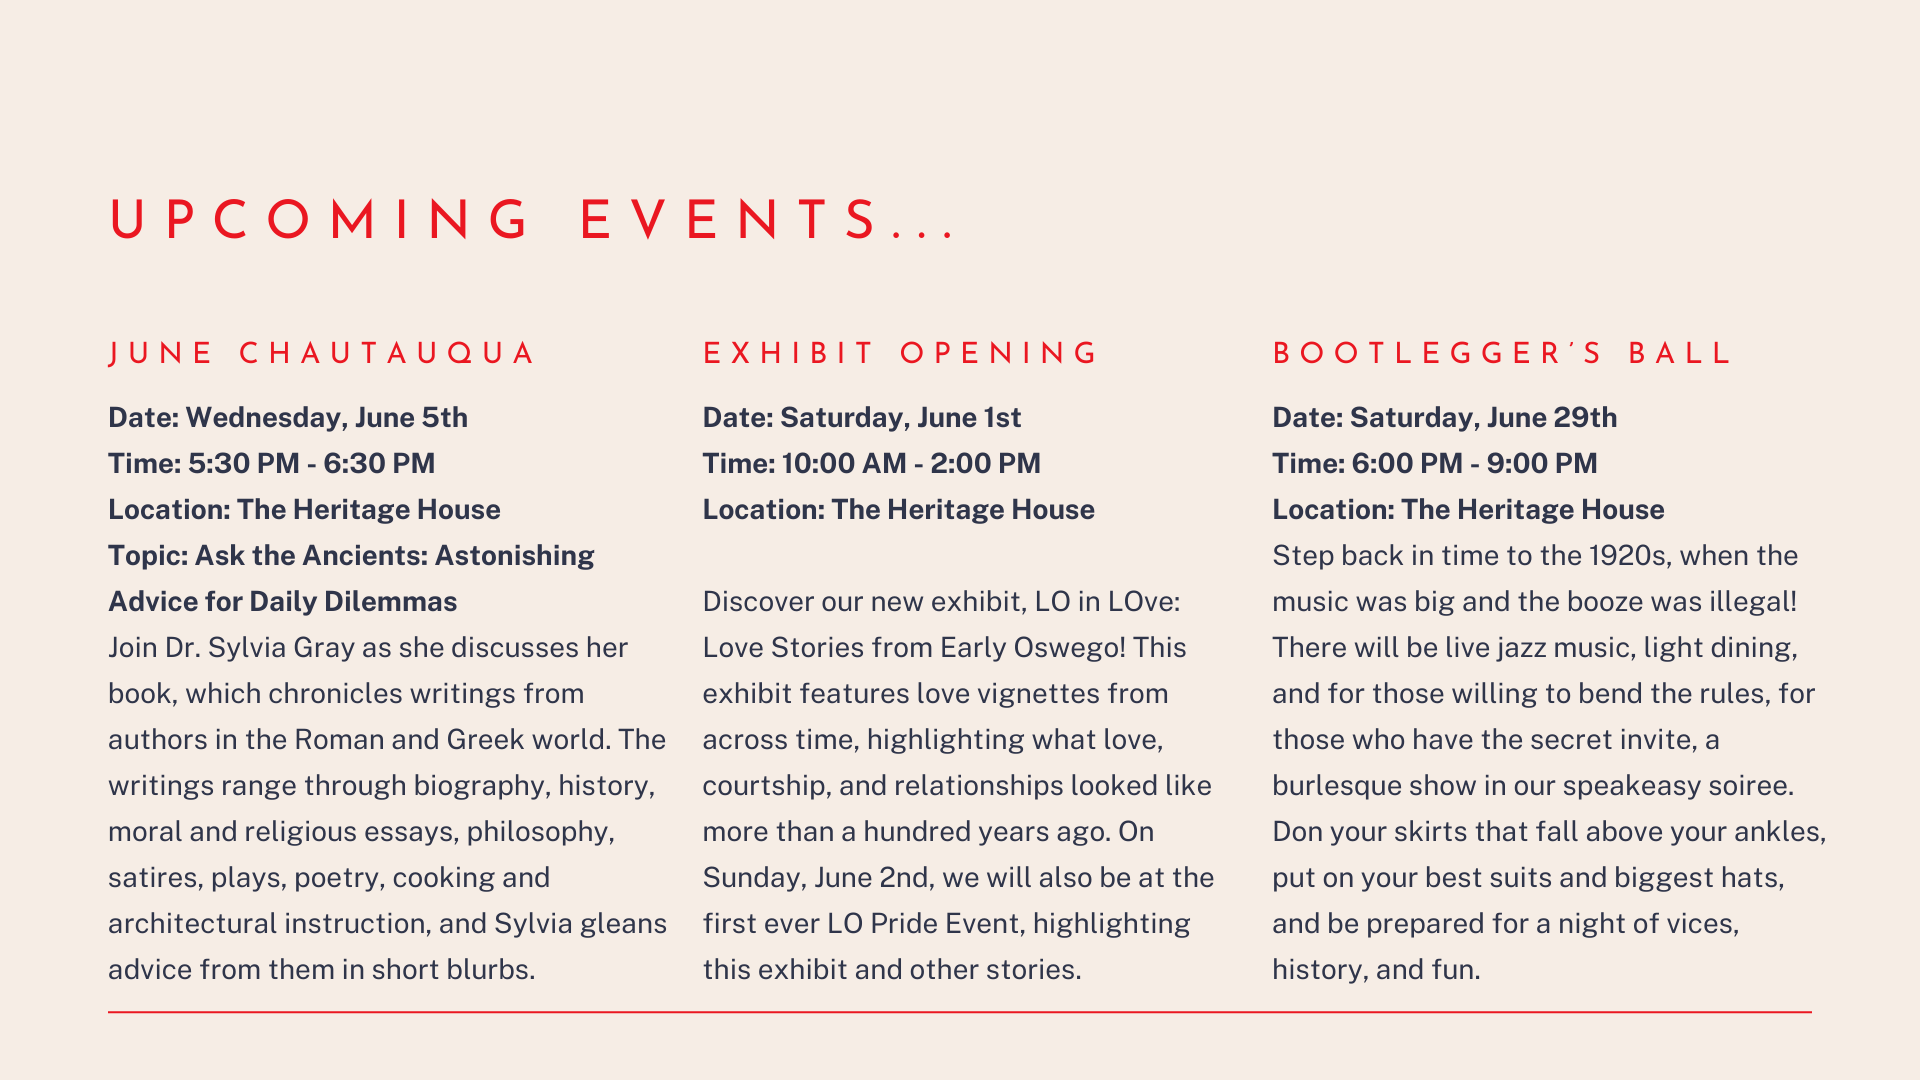 Upcoming events include: June Chautauqua, exhibit opening, and Bootlegger's Ball